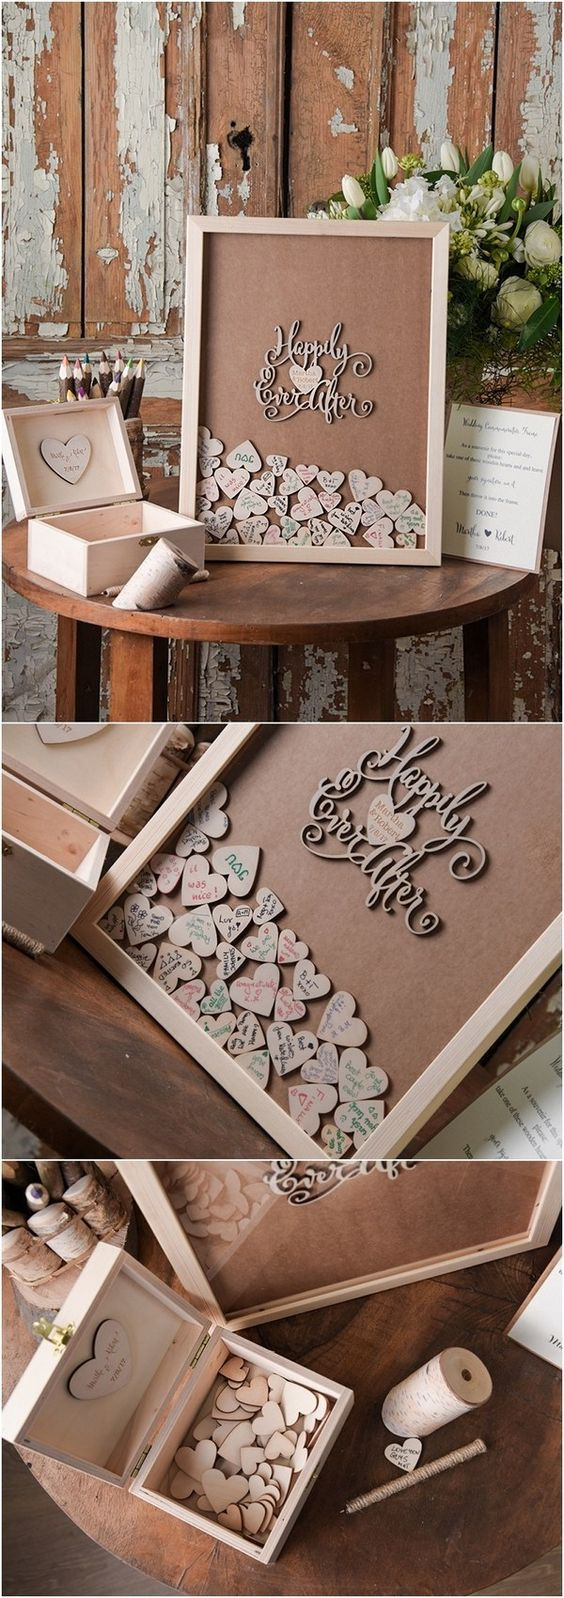 Christmas Wedding Guest Book Ideas
 22 of Our Favorite Unique Wedding Guest Book Ideas Page 2